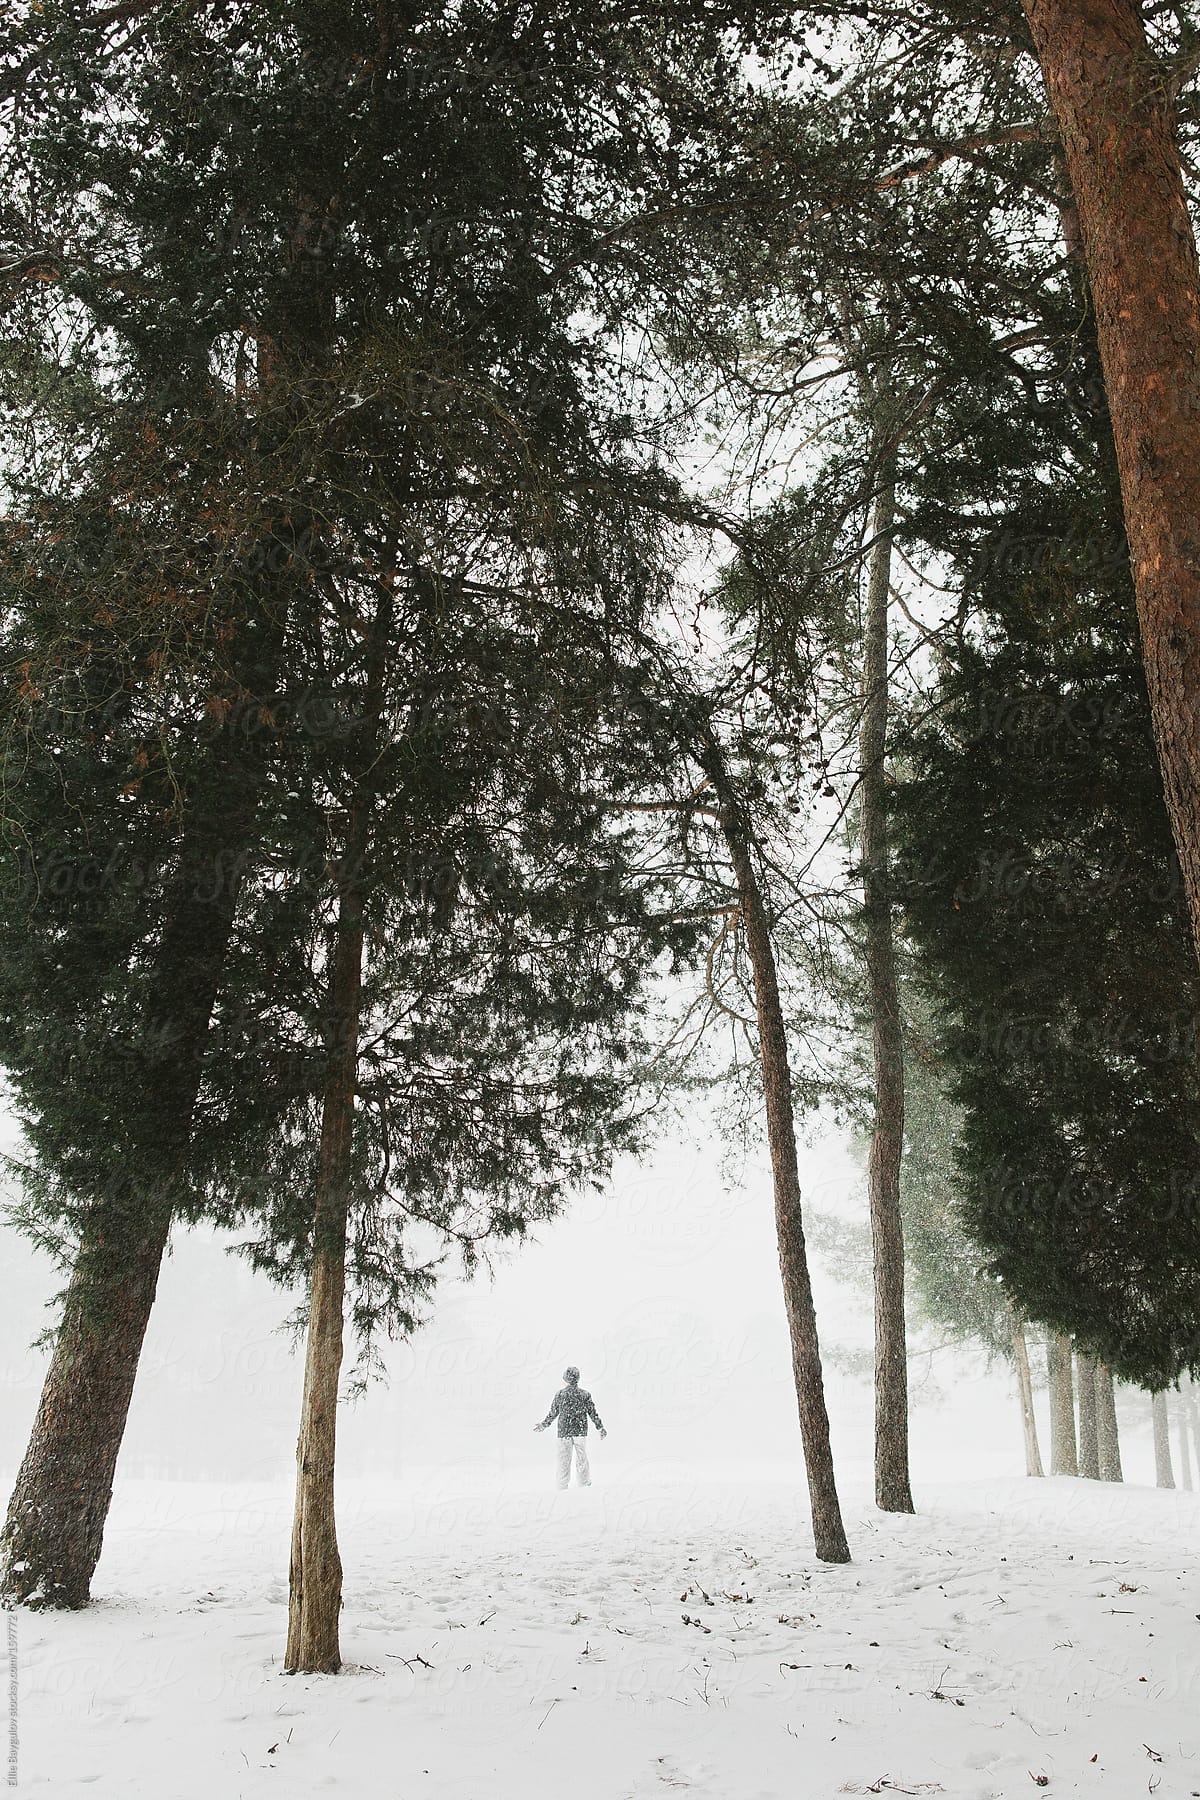 Tiny figure in snowy forest